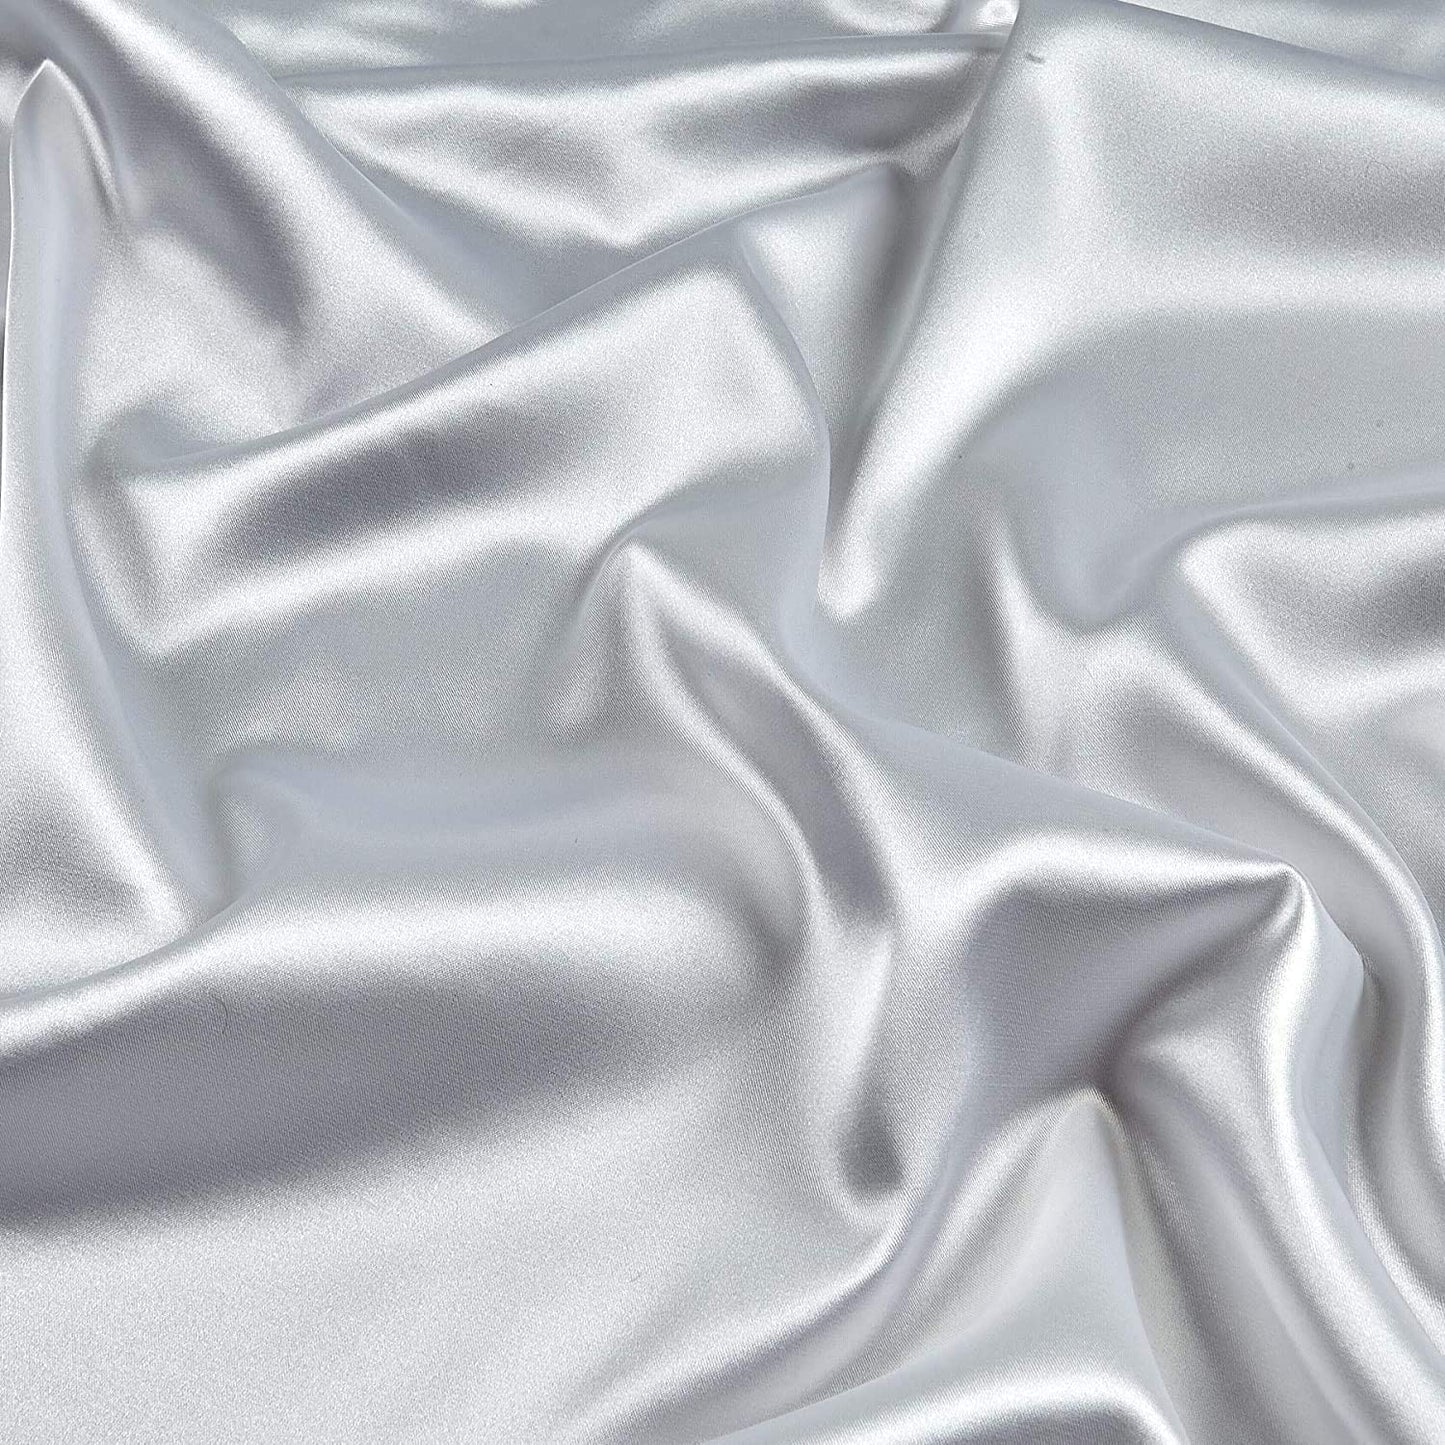 Spandex Light Weight Silky Stretch Charmeuse Satin Fabric (Silver 1126,